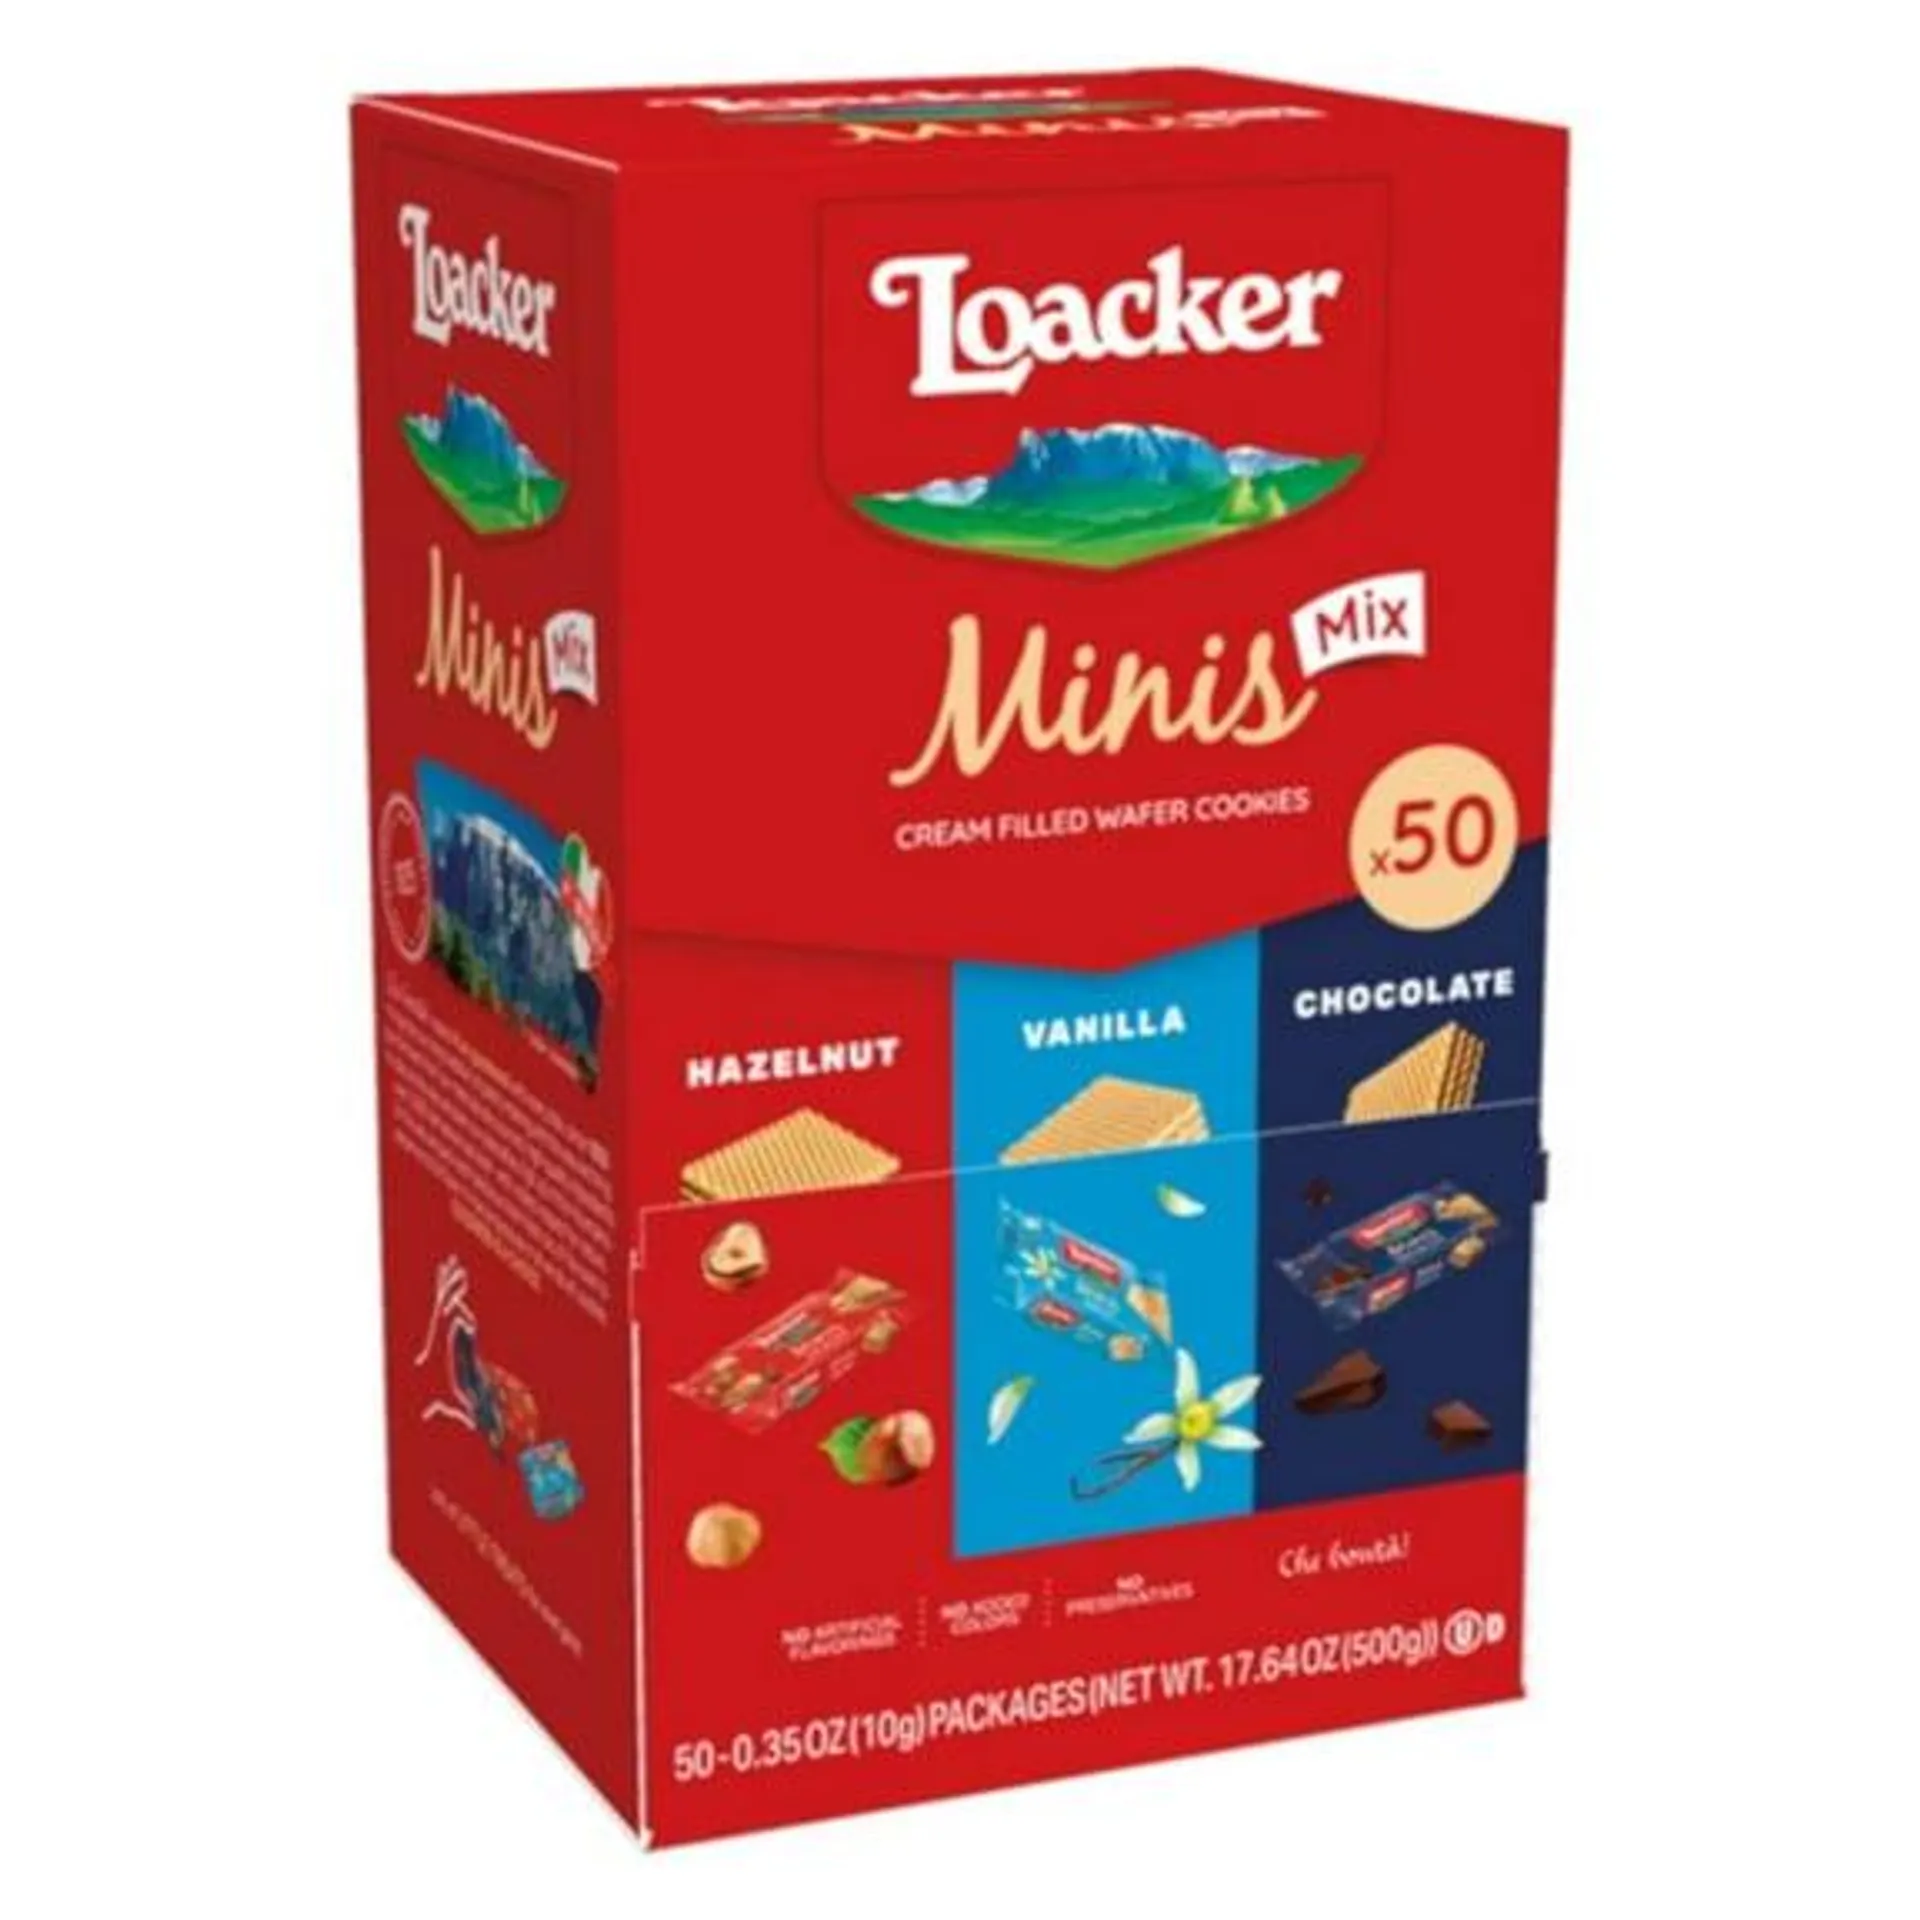 Loacker Minis Mix, Variety Pack of Crème-filled Wafer Cookies, 0.35 oz/50-ct